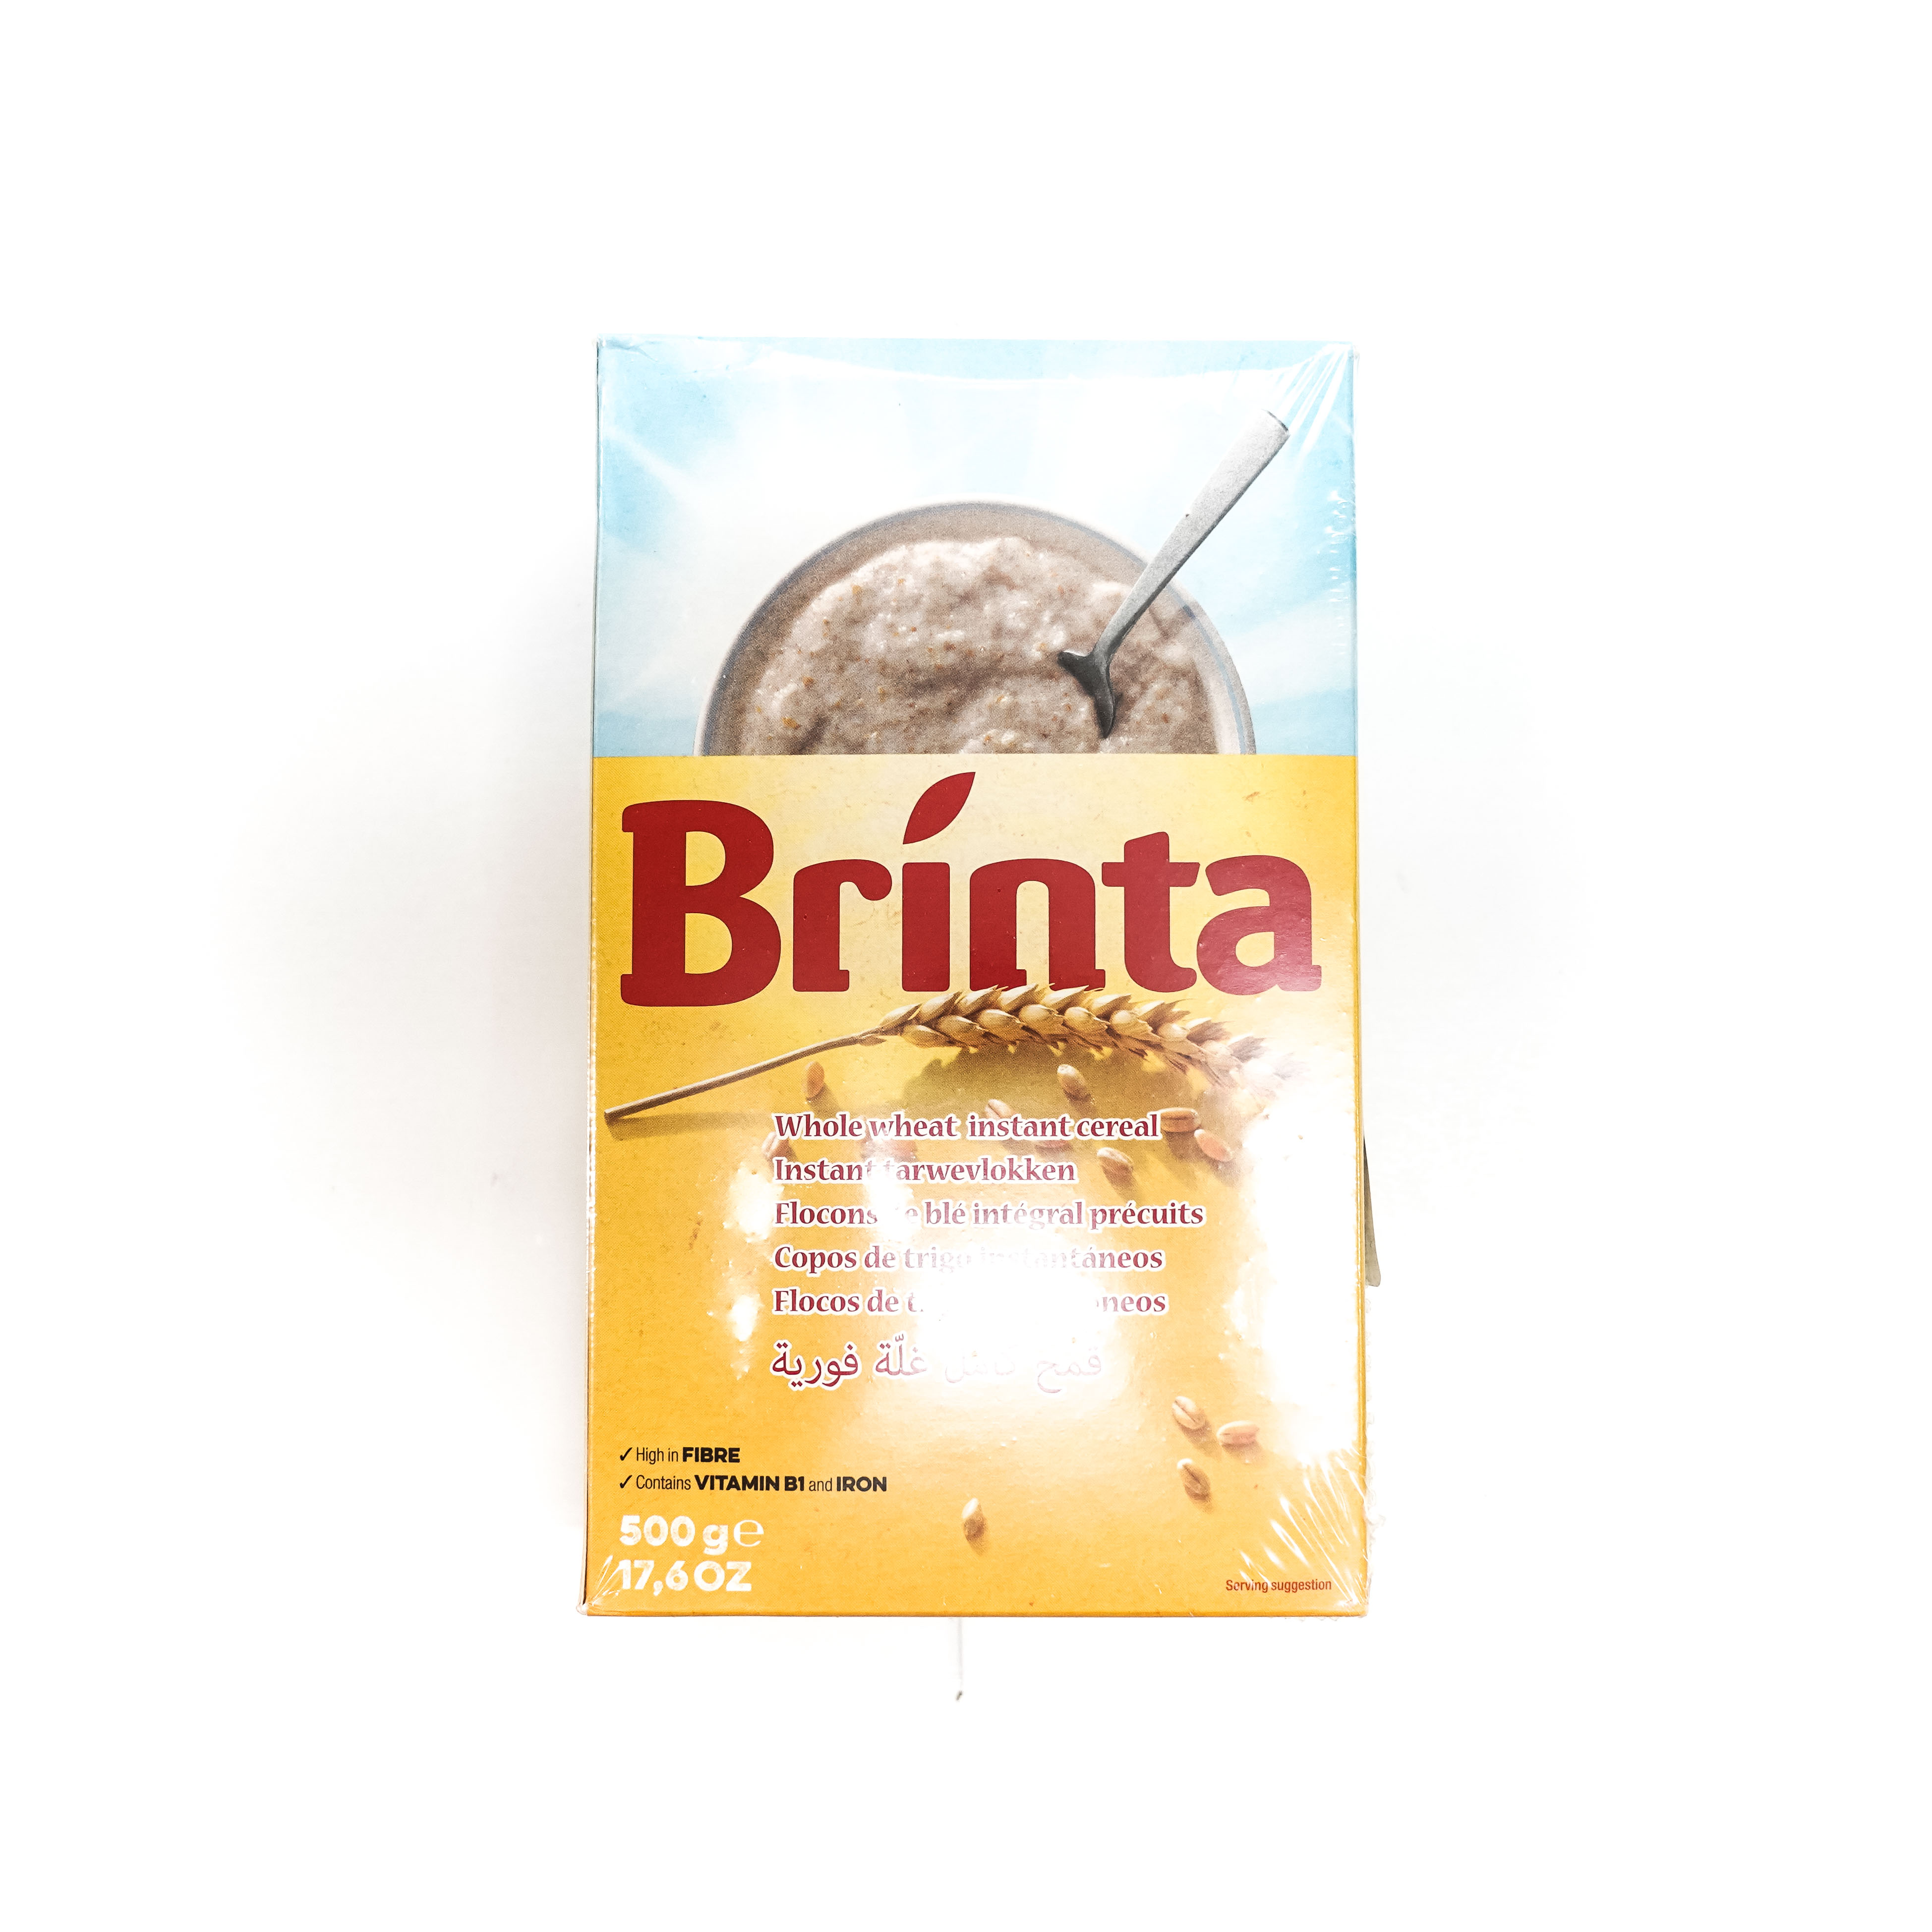 Brinta Instant Whole Wheat Cereal